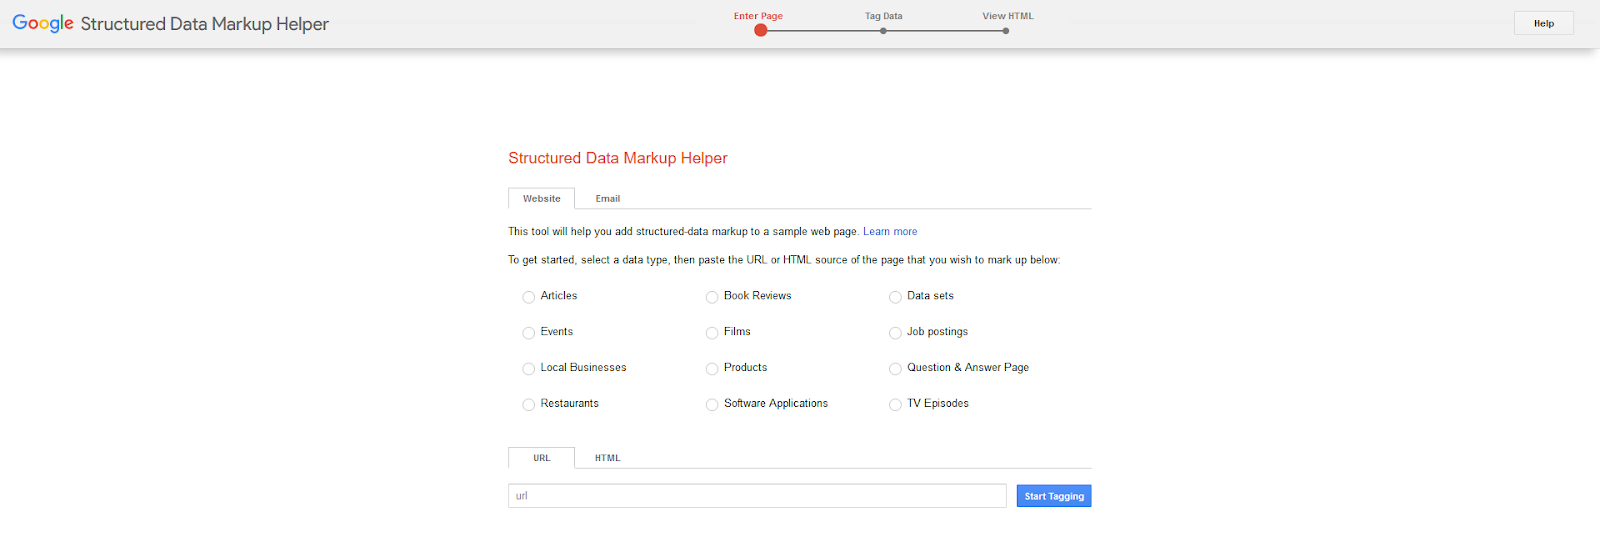 A view of the Google Structured Data Markup Helper tool